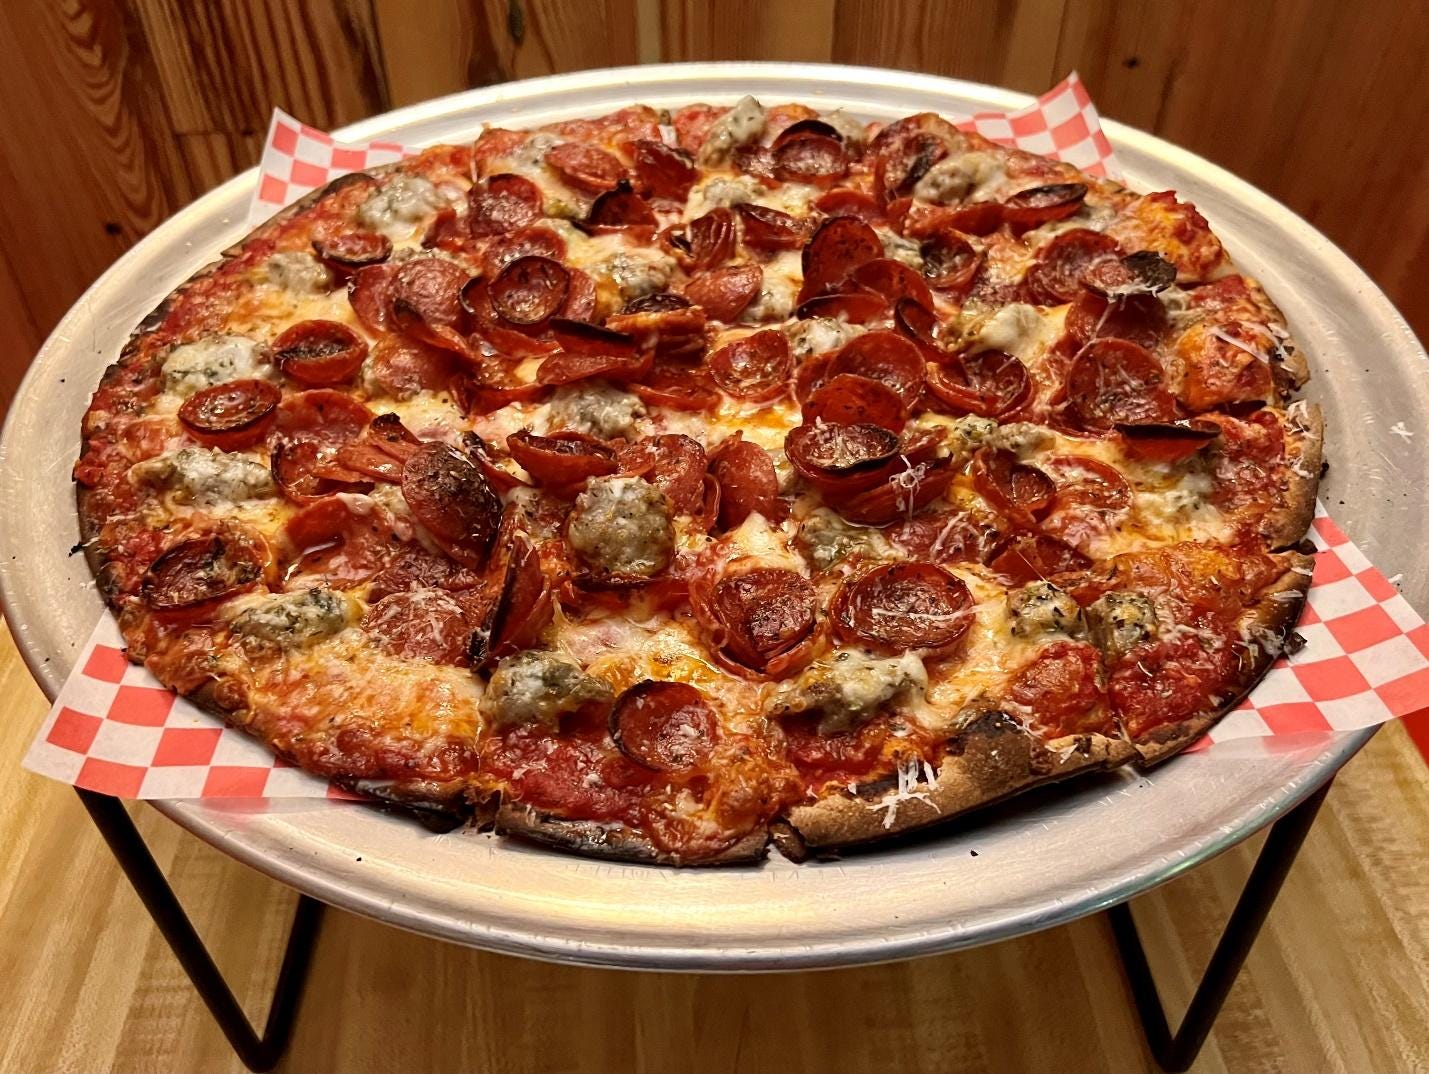 A pizza with pepperoni and cheese

Description automatically generated with low confidence